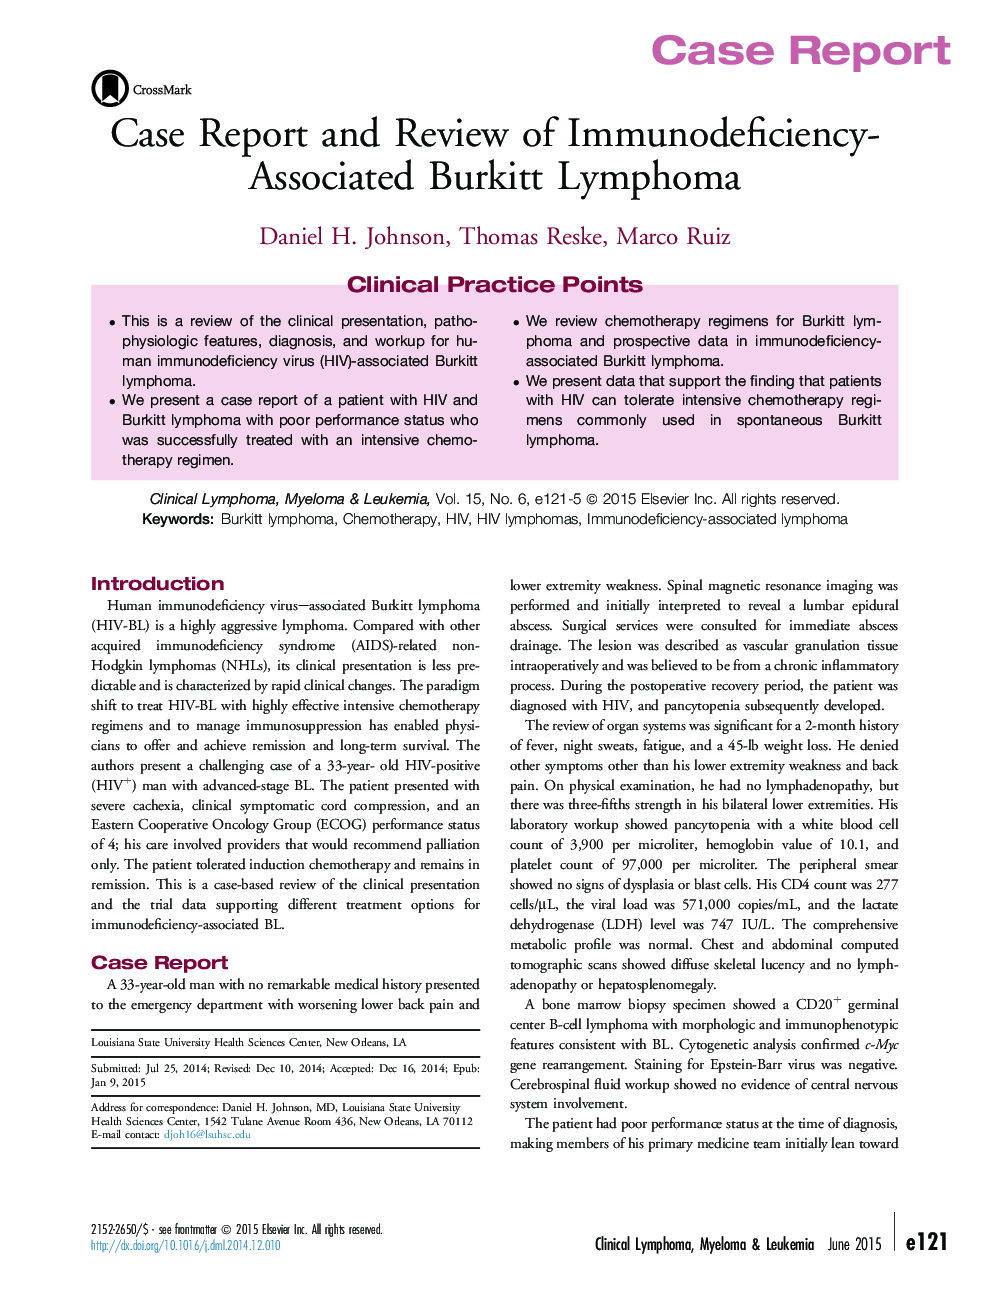 Case Report and Review of Immunodeficiency-Associated Burkitt Lymphoma